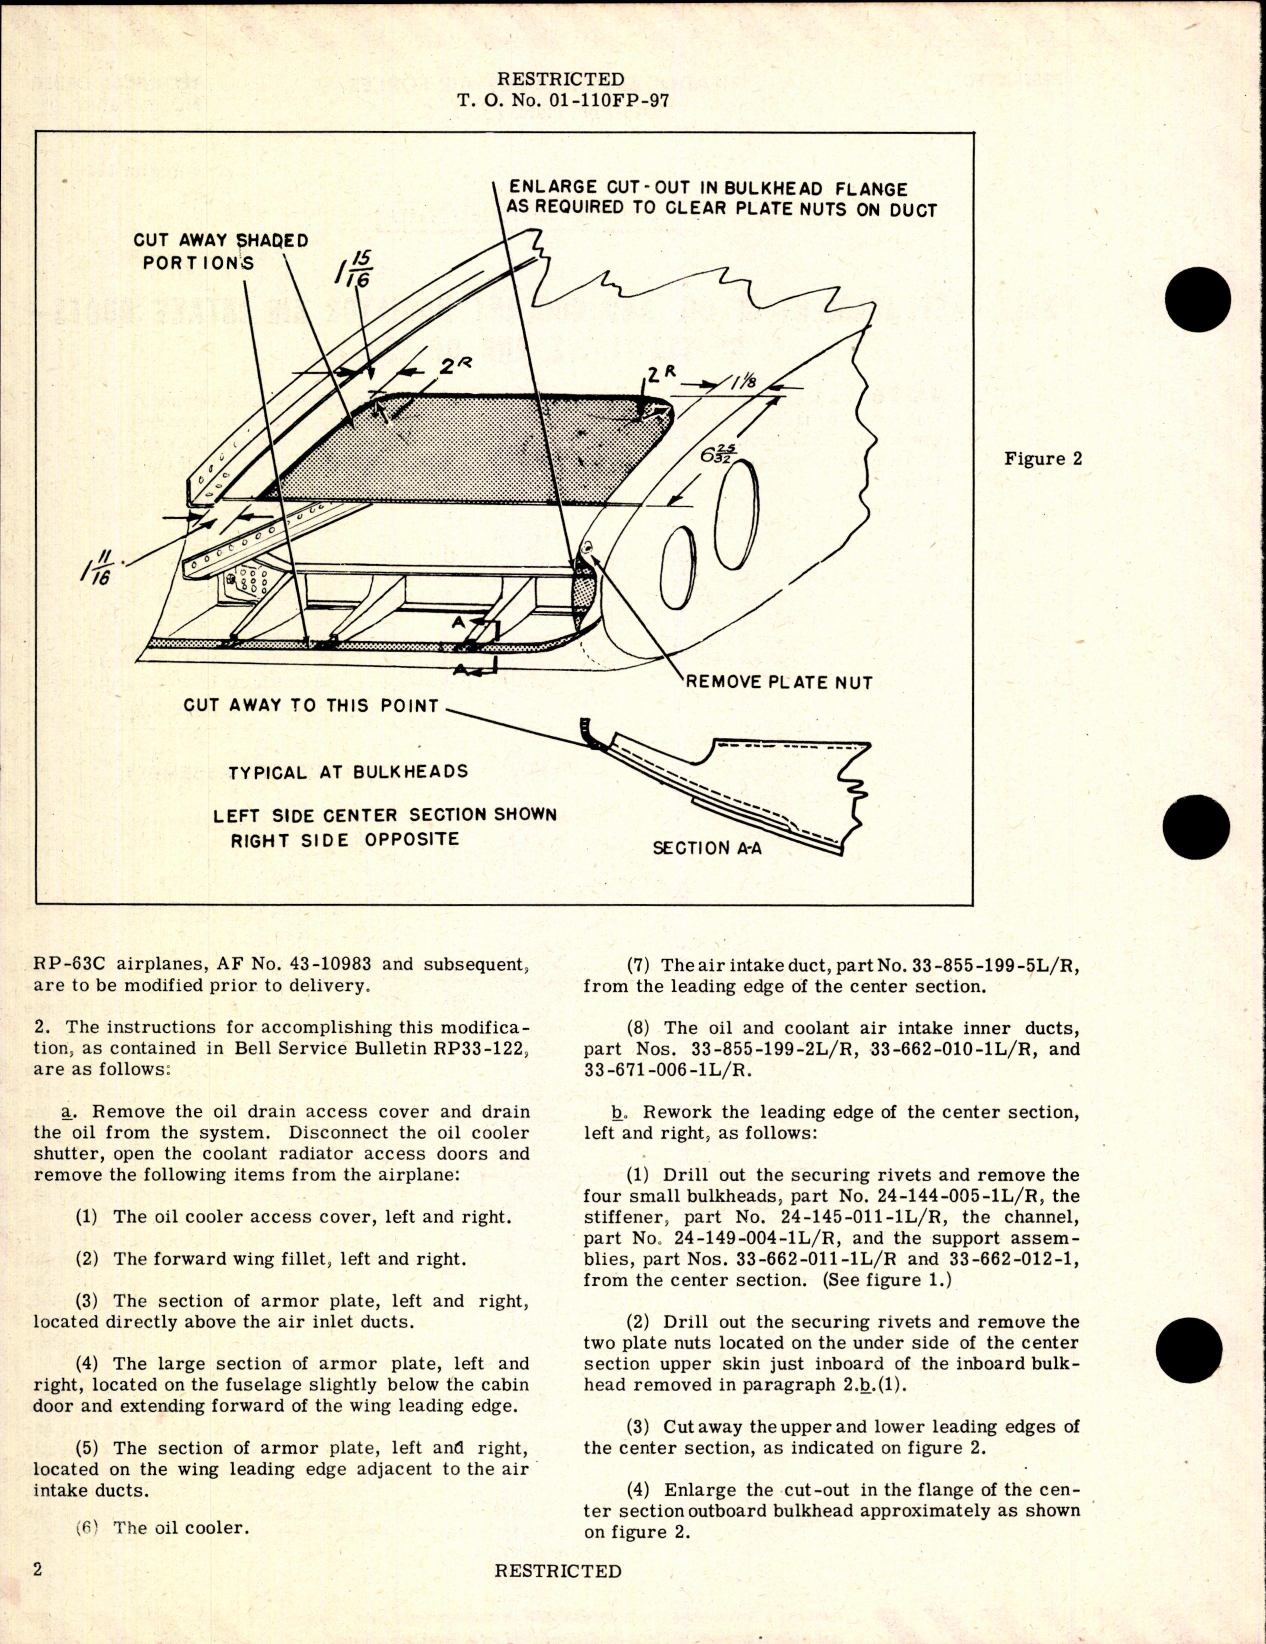 Sample page 2 from AirCorps Library document: Replacement of Oil and Coolant Radiator Air Intake Ducts